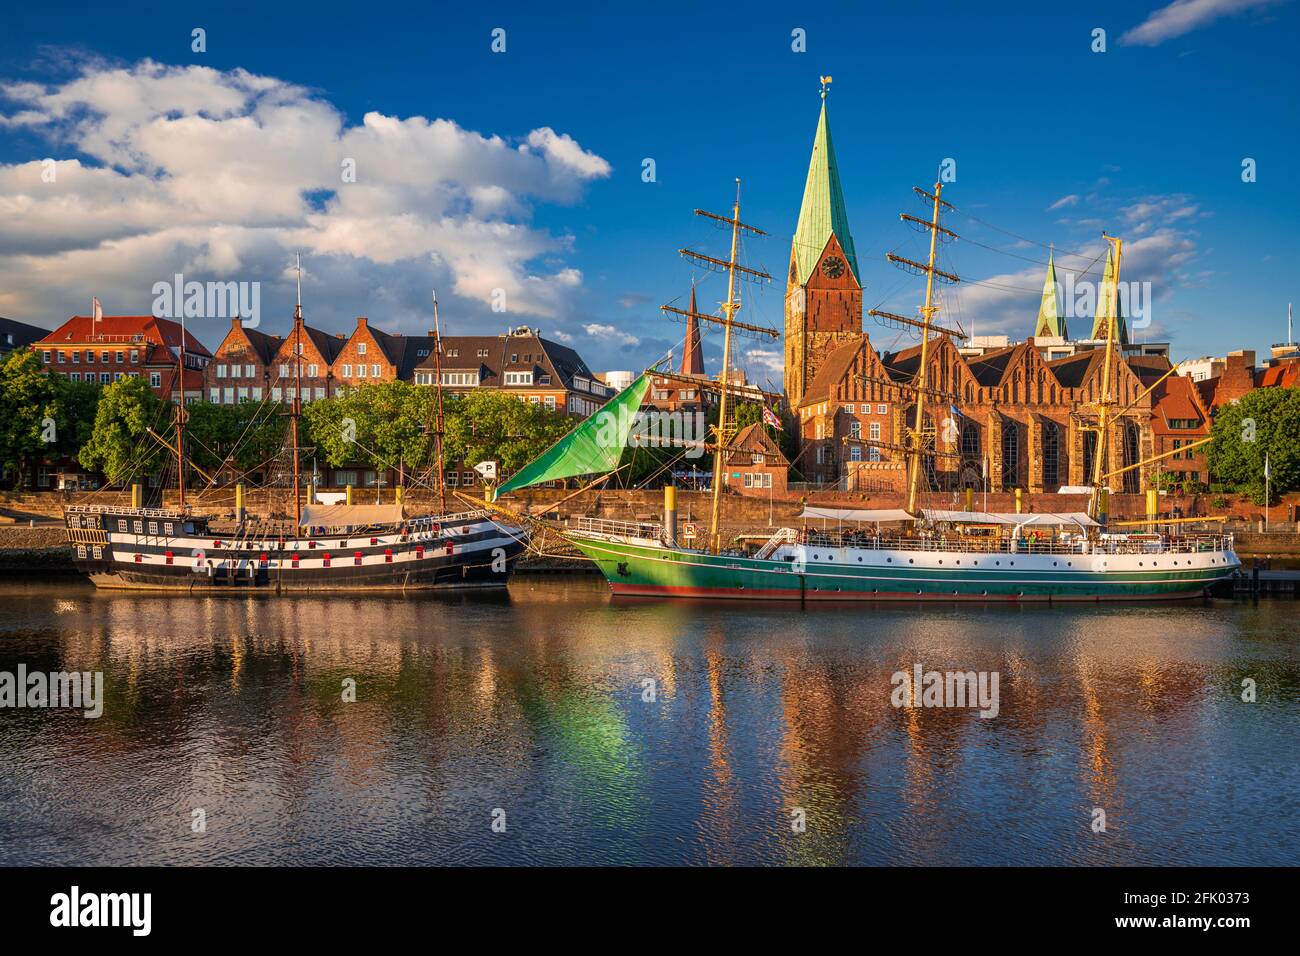 Historic town of Bremen with old sailing ships on Weser river, Germany Stock Photo